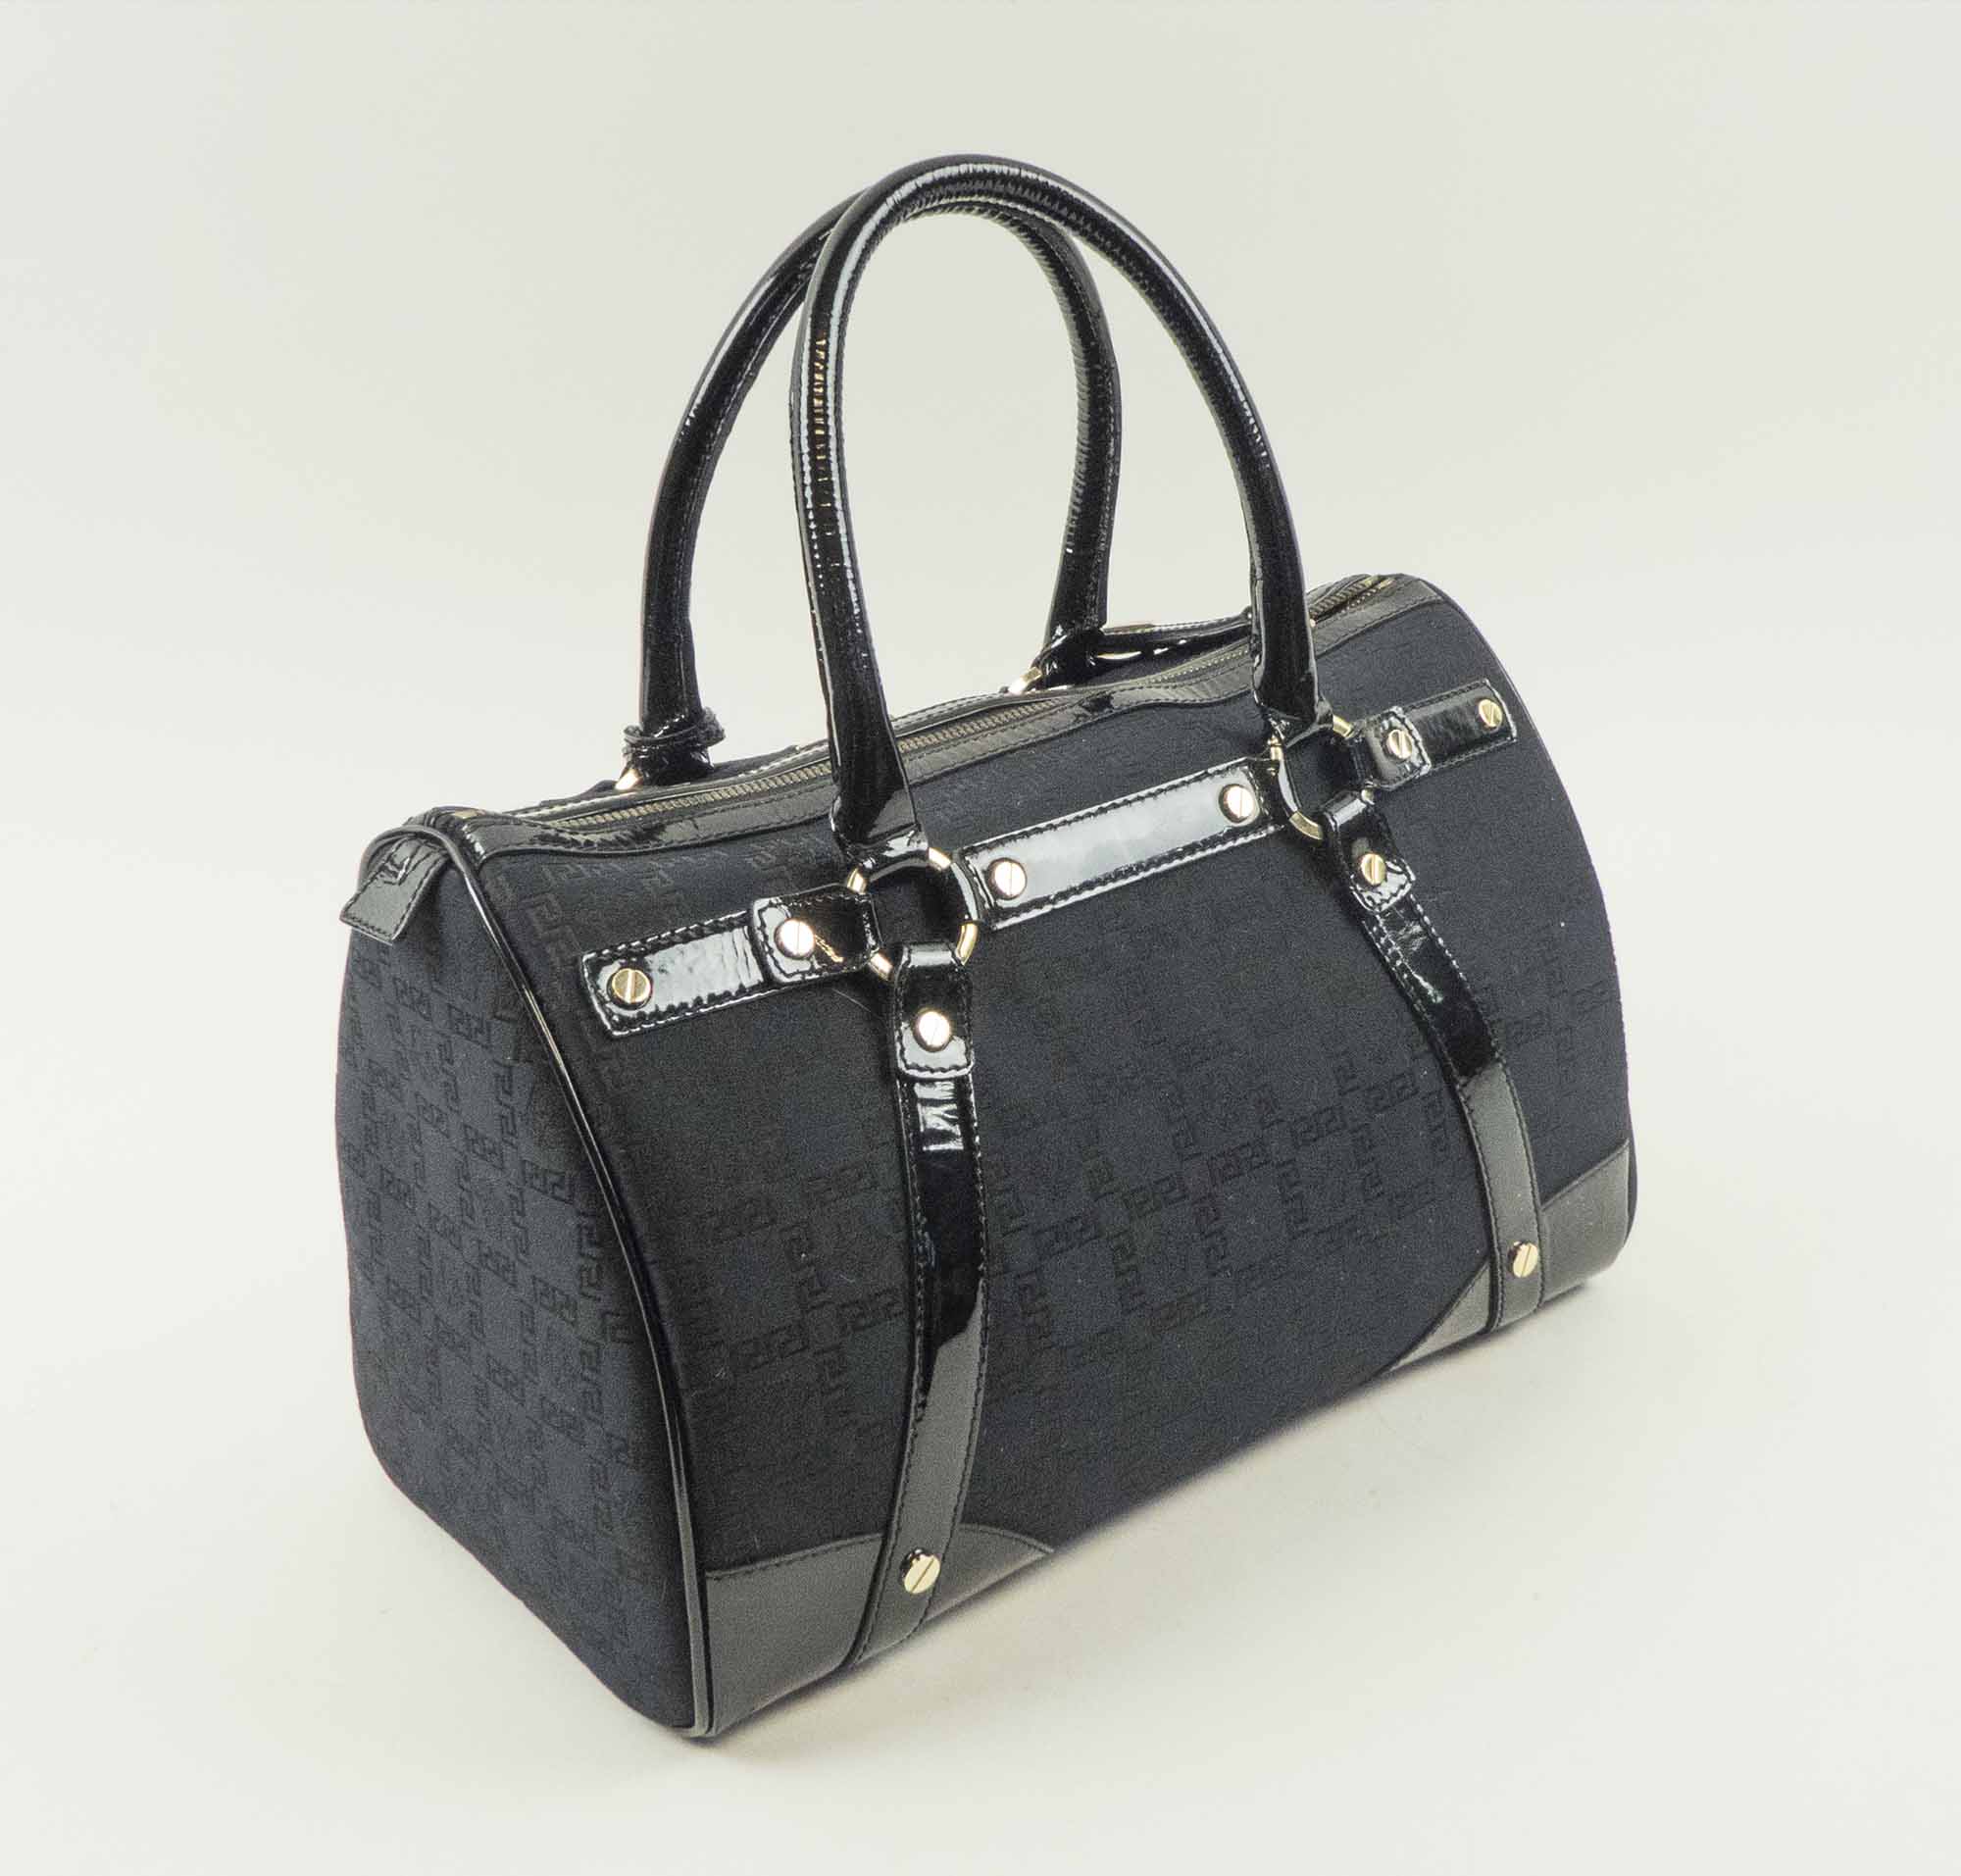 GIANNI VERSACE HANDBAG, black fabric with patent leather trims and top ...